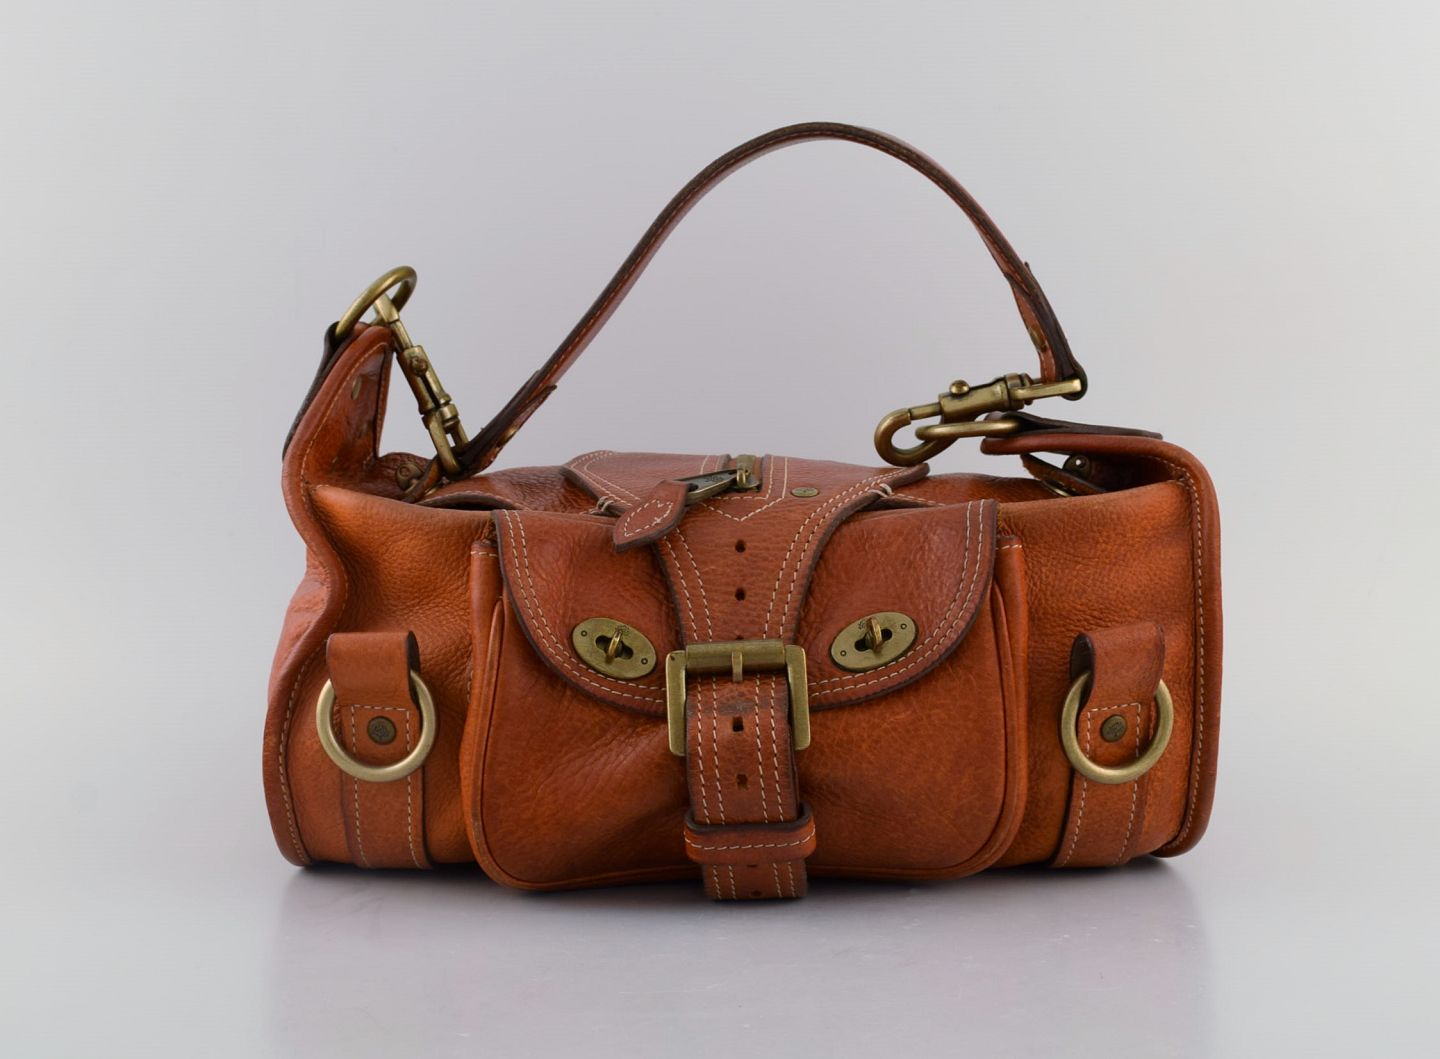  Vintage Mulberry handbag in core leather with